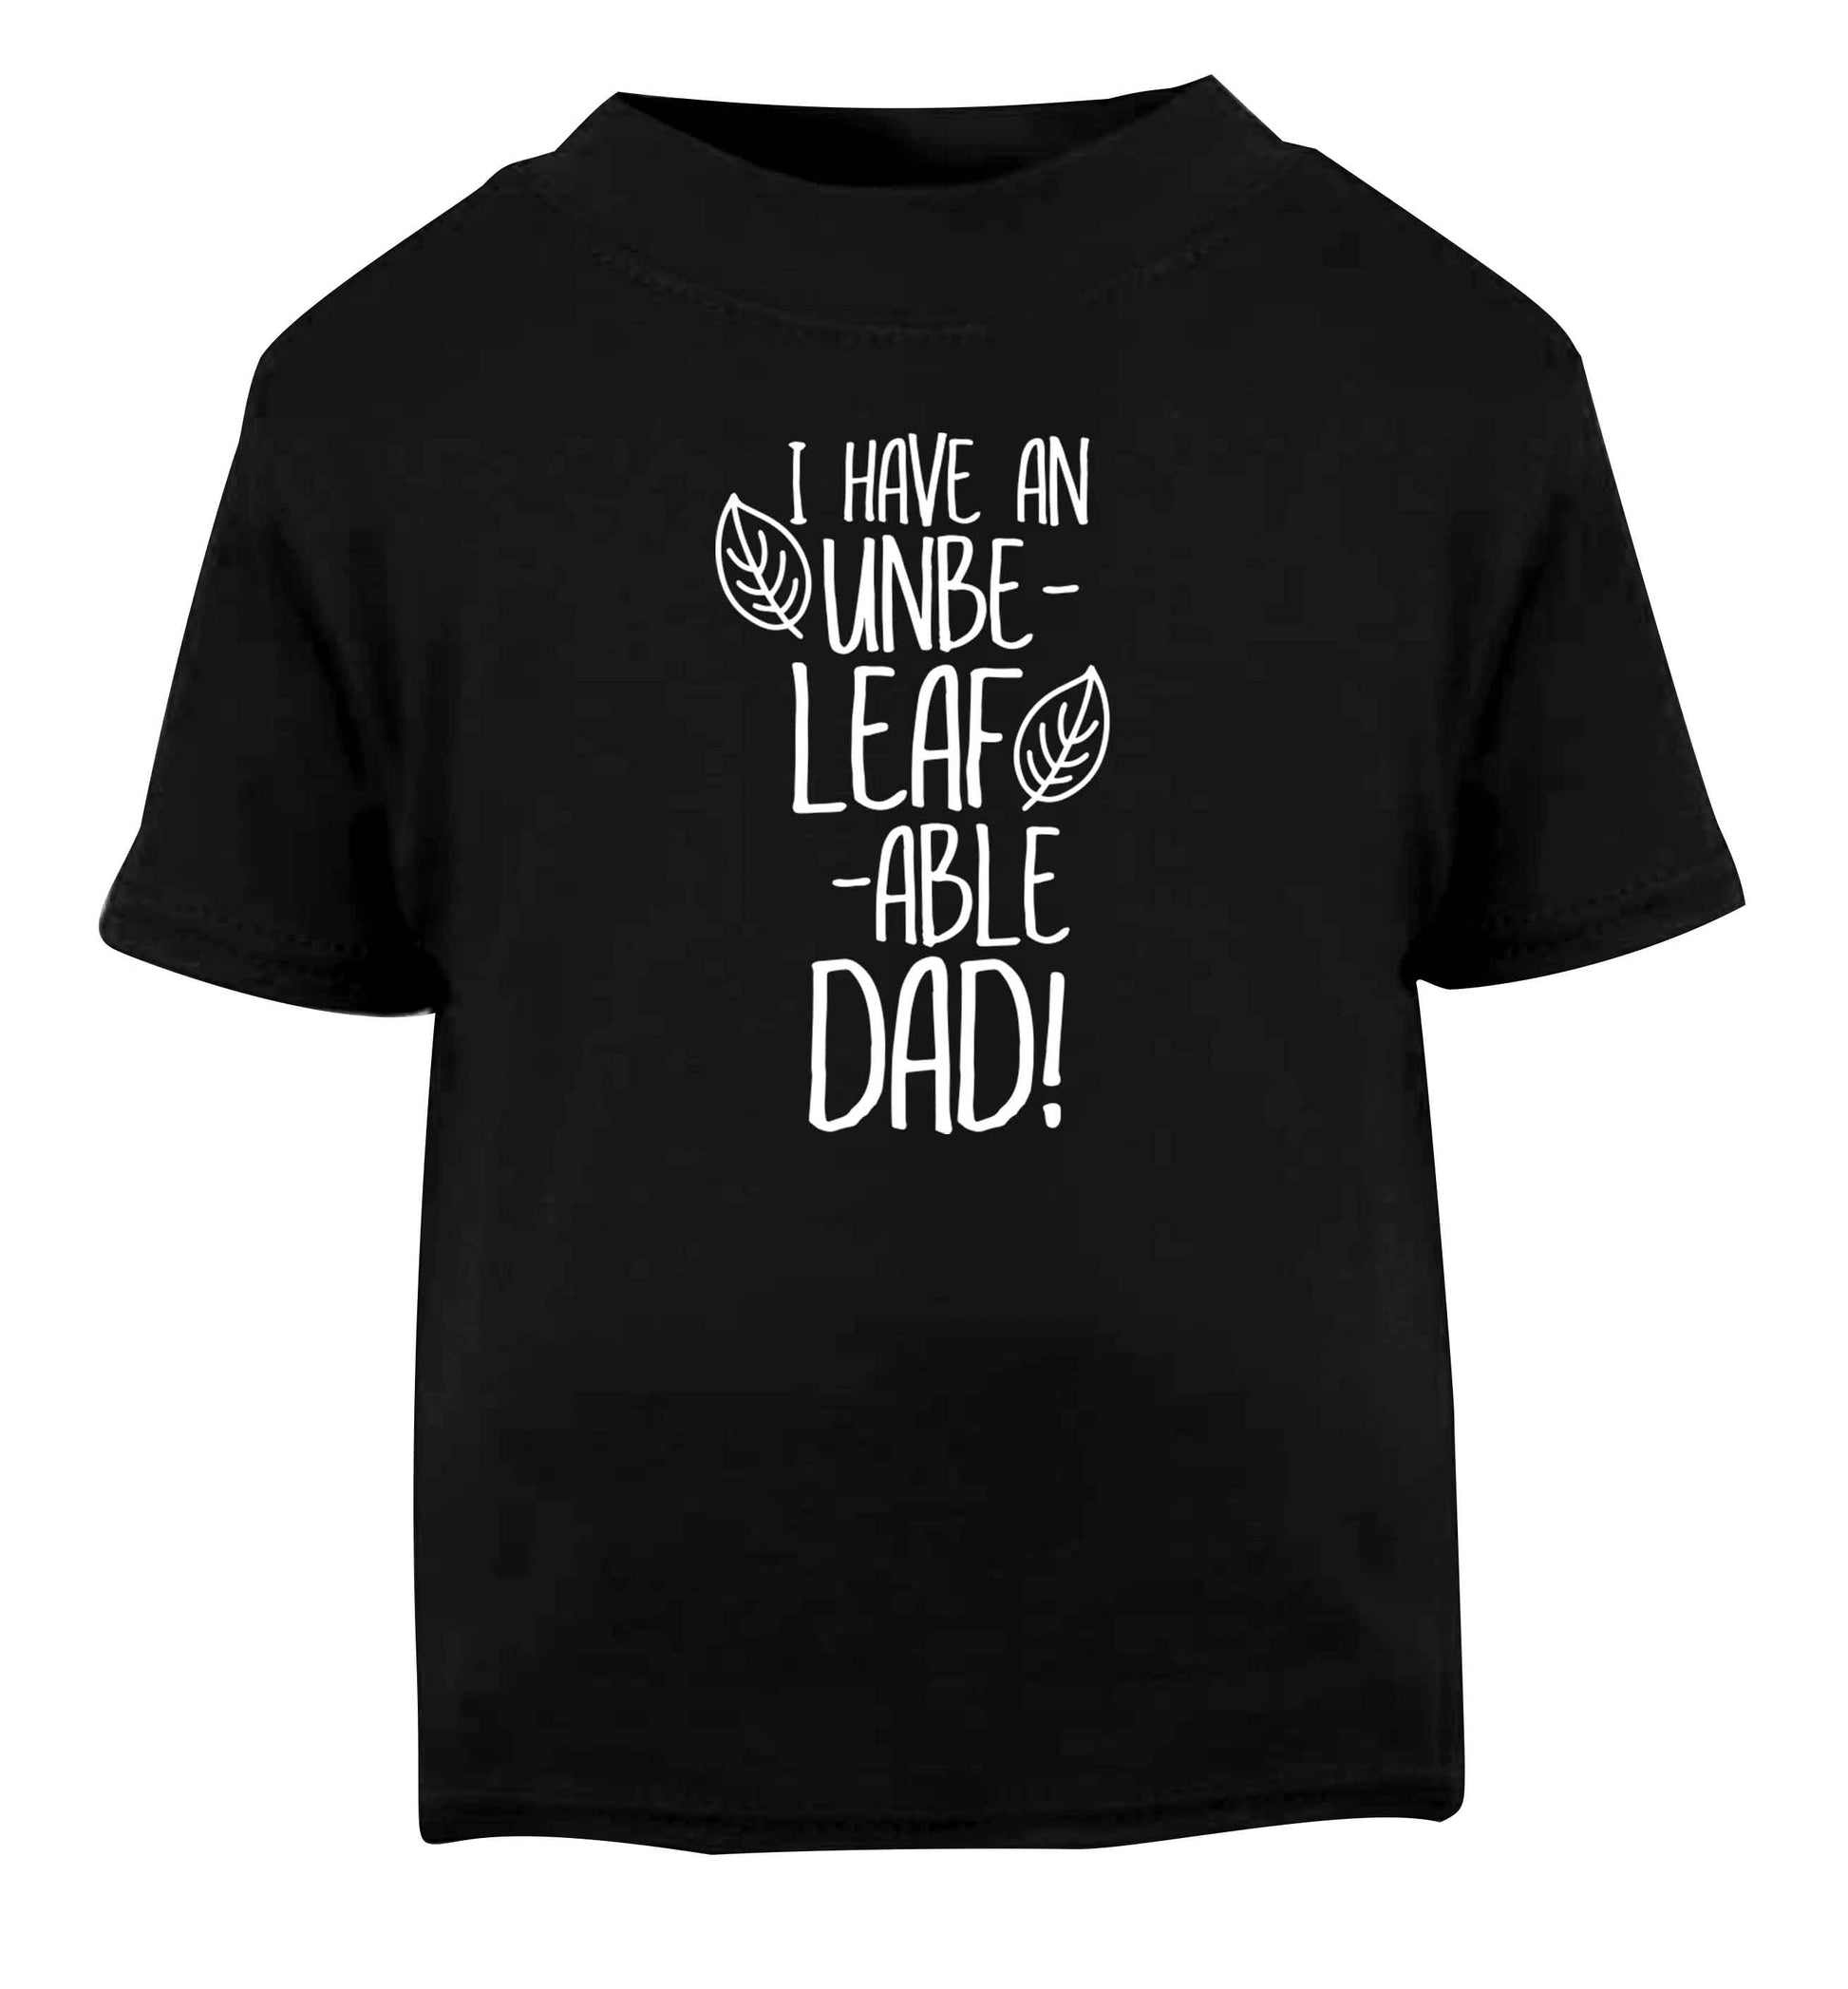 I have an unbe-leaf-able dad Black Baby Toddler Tshirt 2 years